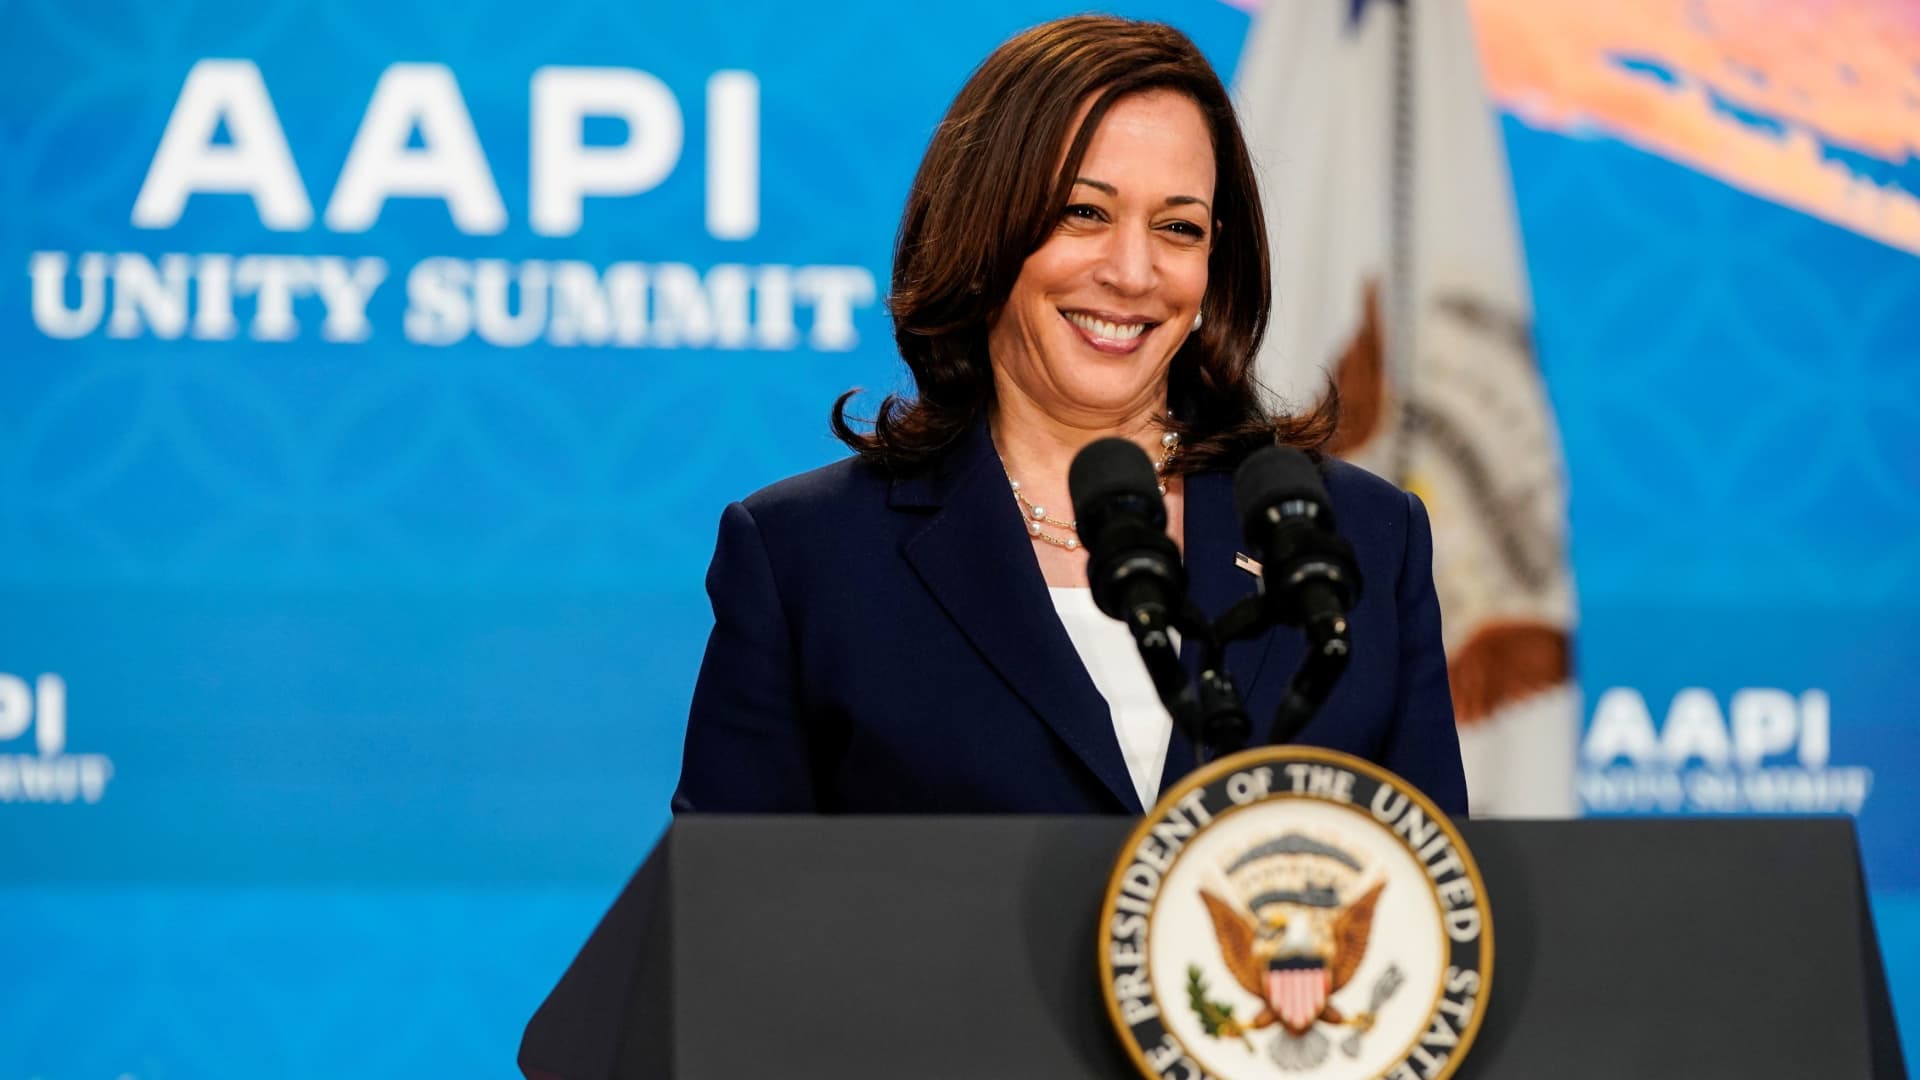 U.S. Vice President Kamala Harris delivers remarks to the Asian Pacific American Heritage Month Unity Summit in the Eisenhower Executive Office Building in Washington, U.S., May 19, 2021.